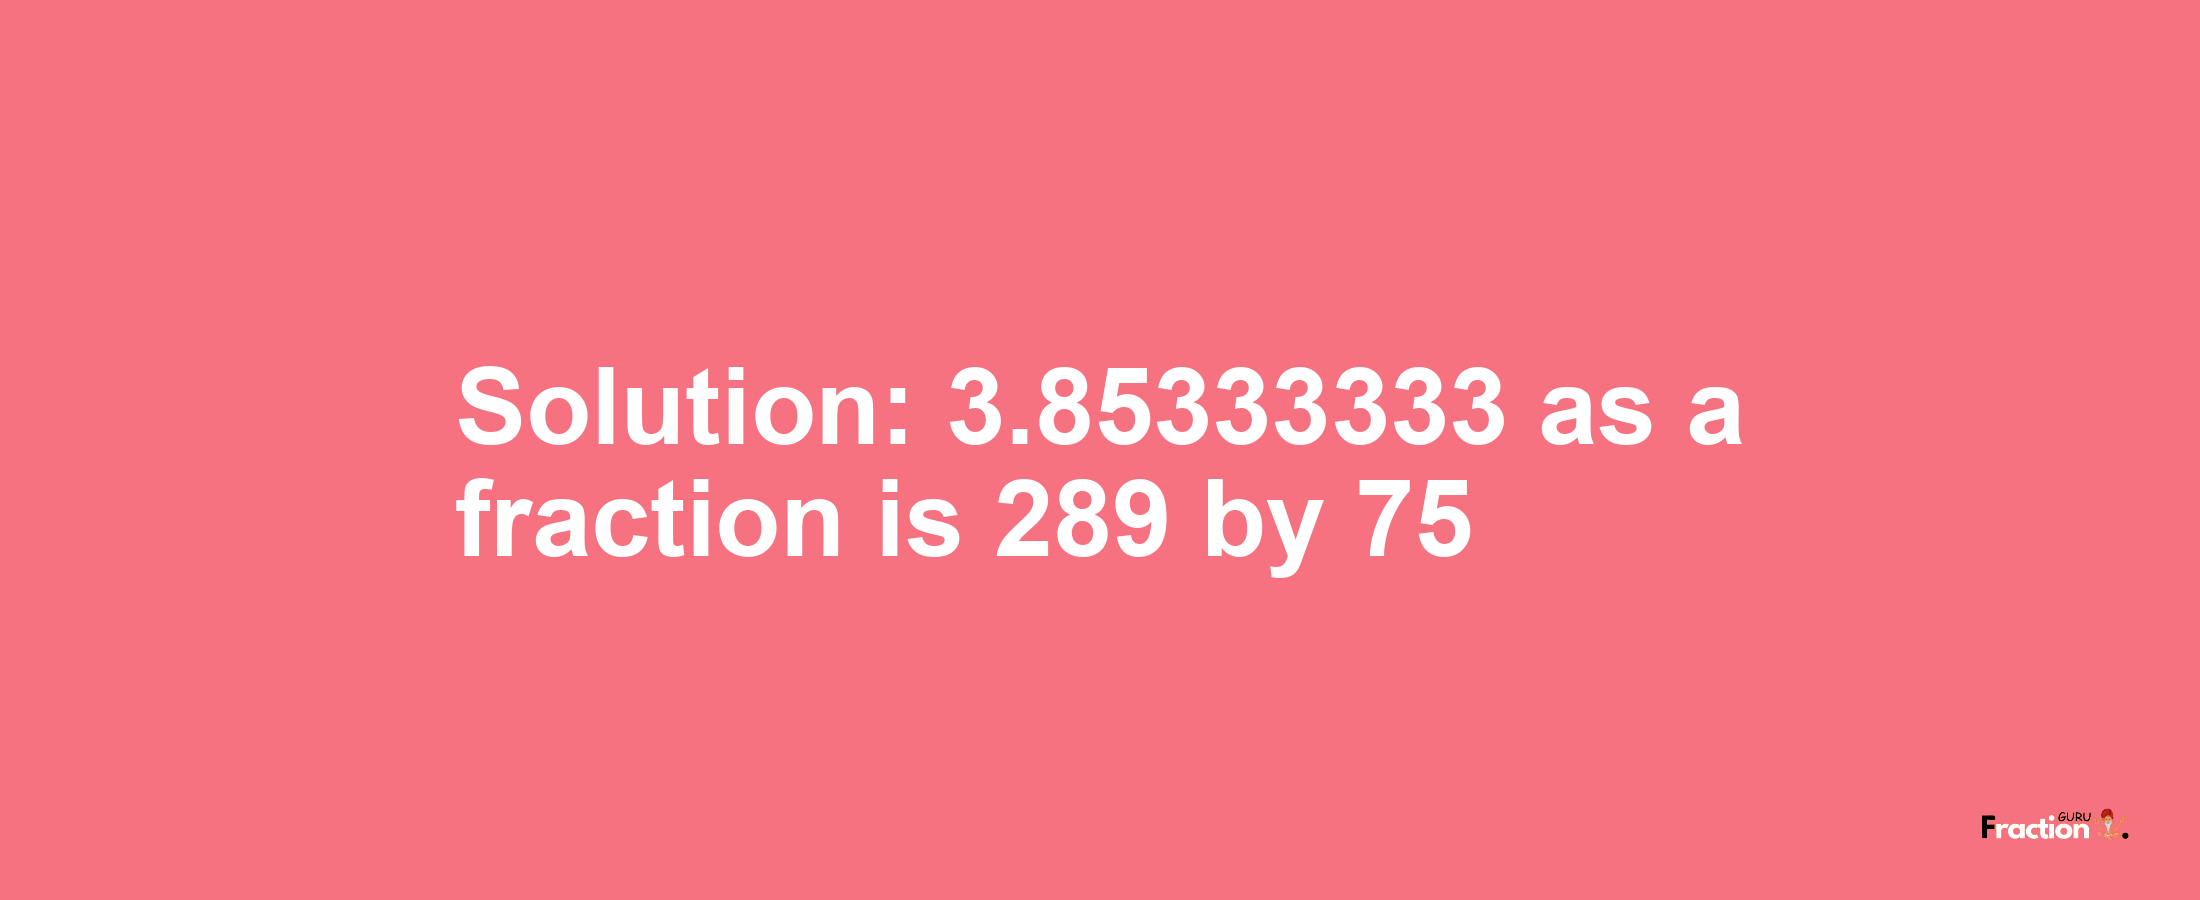 Solution:3.85333333 as a fraction is 289/75